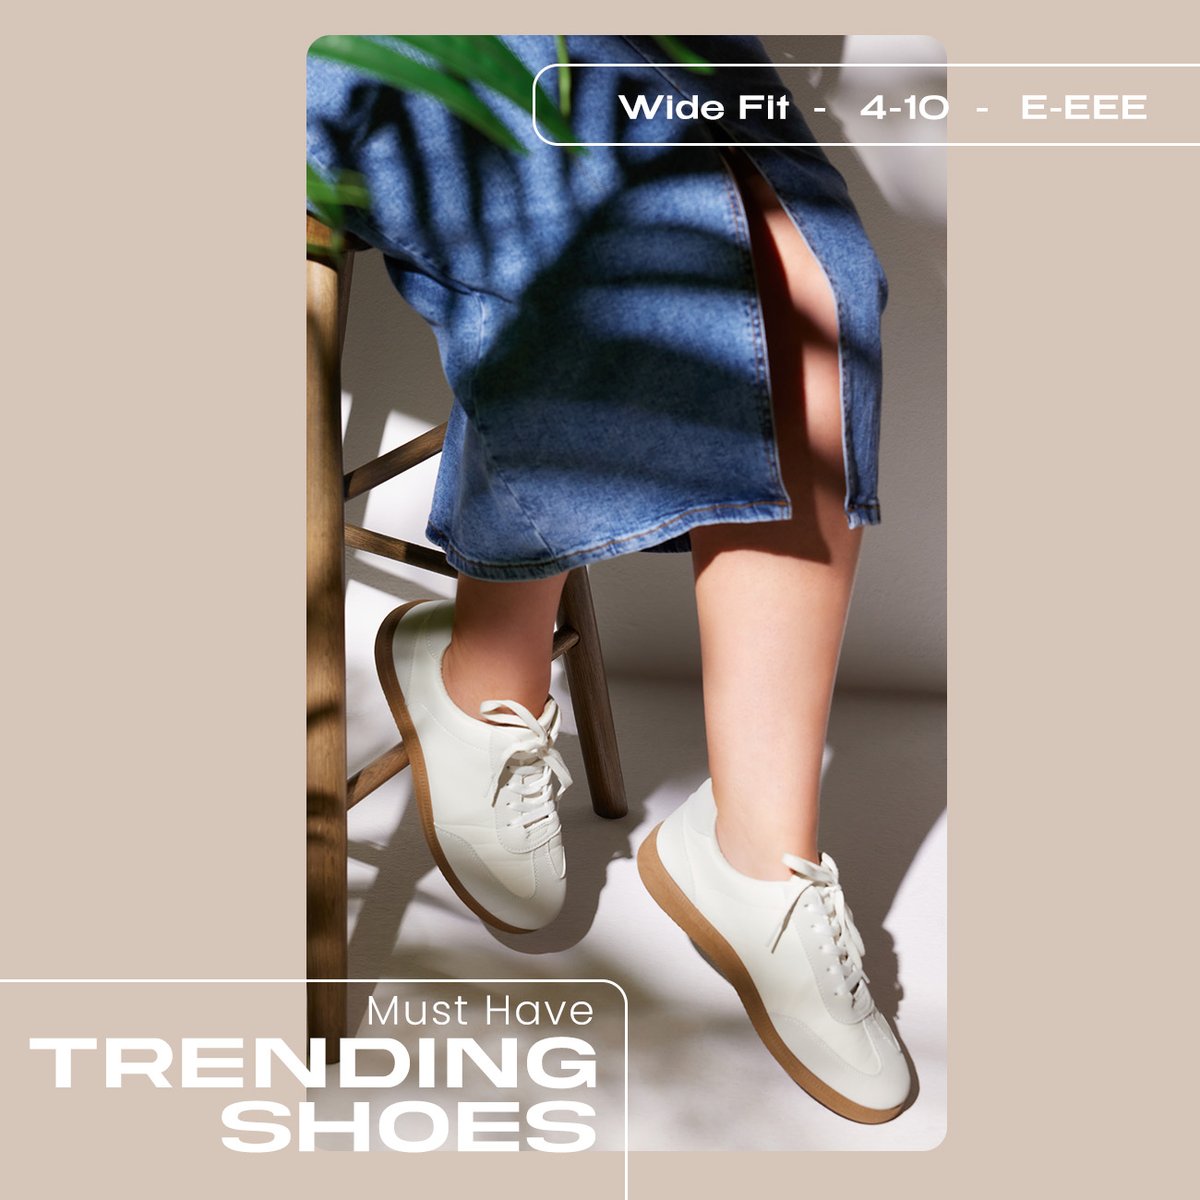 Looking for wide fit footwear alternatives to all the latest styles?👟 Check out our blog for our trending footwear in wide fit UK shoe sizes 4-10EEE✨👉 bit.ly/3U8gaK4